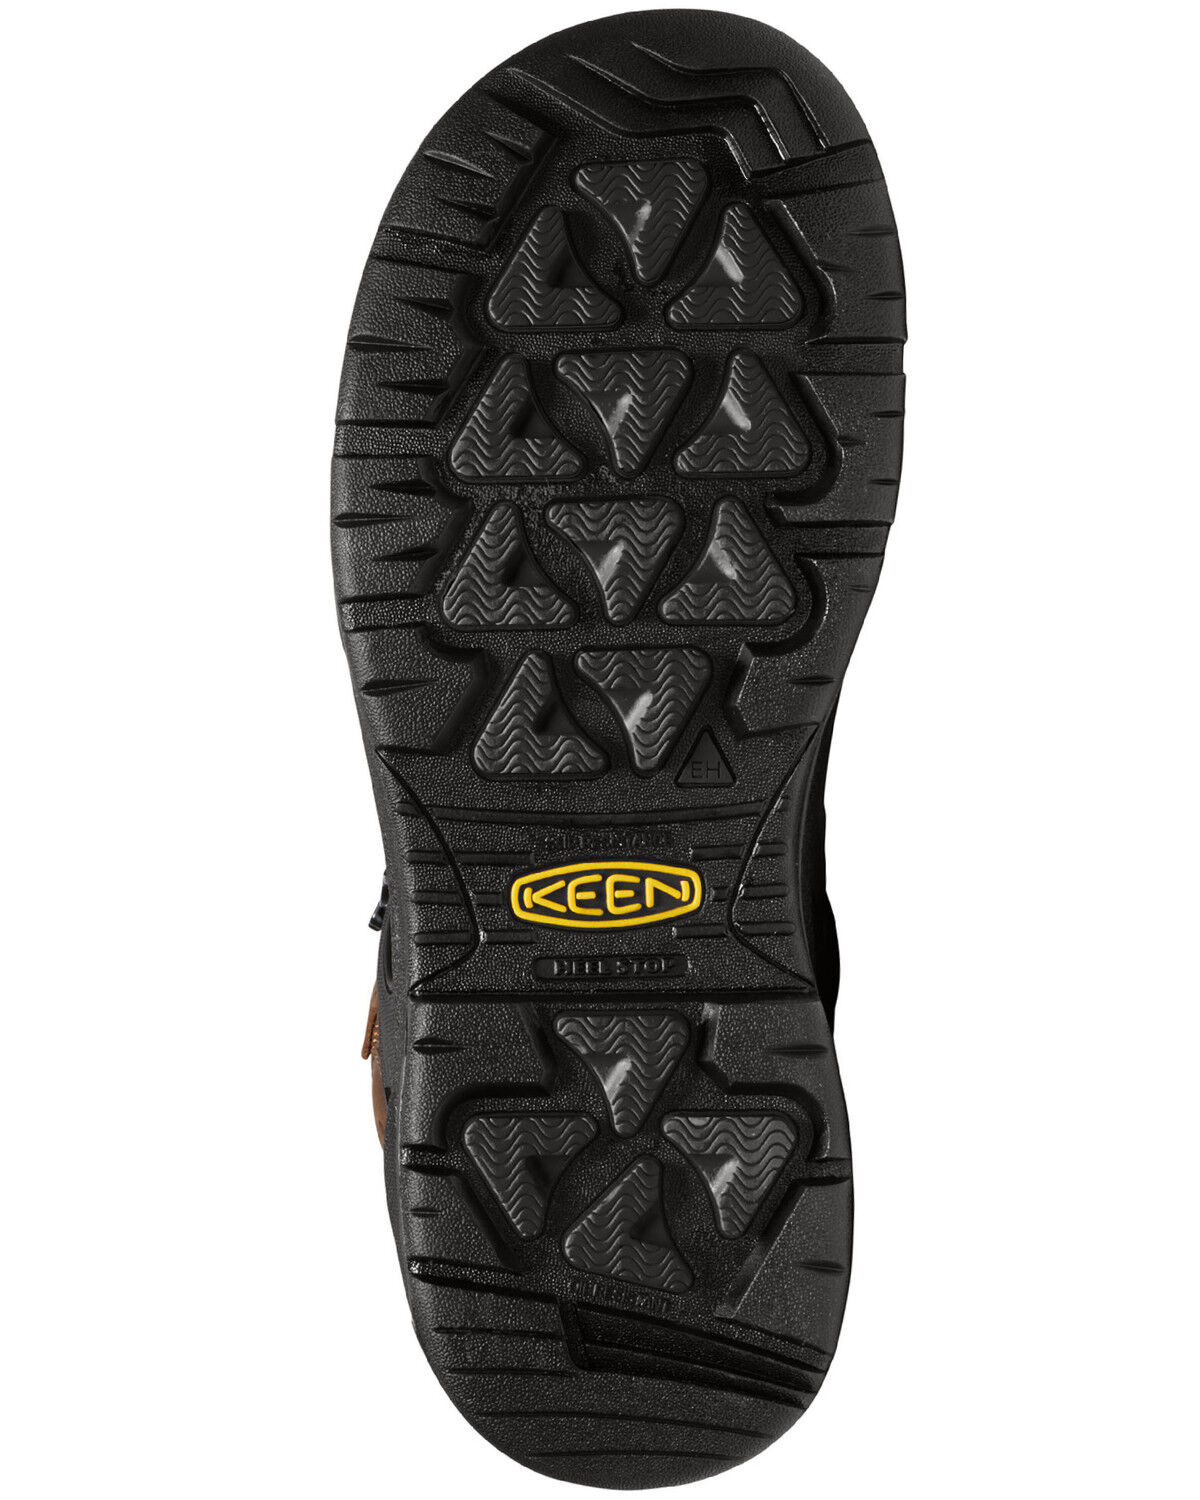 keen dover boots